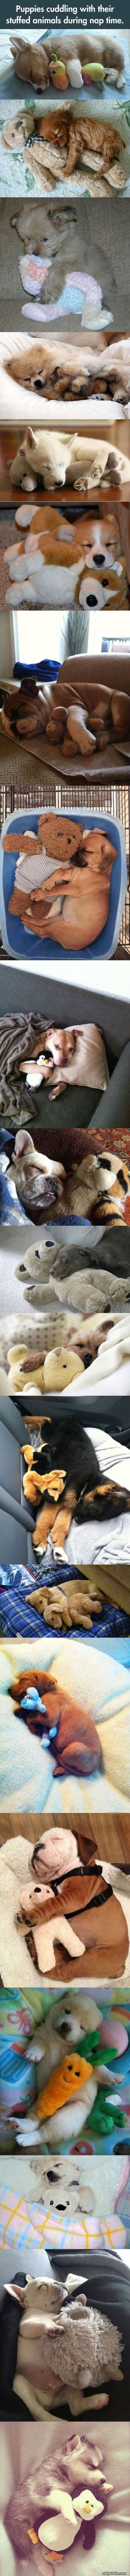 puppies cuddling stuffed animals funny picture